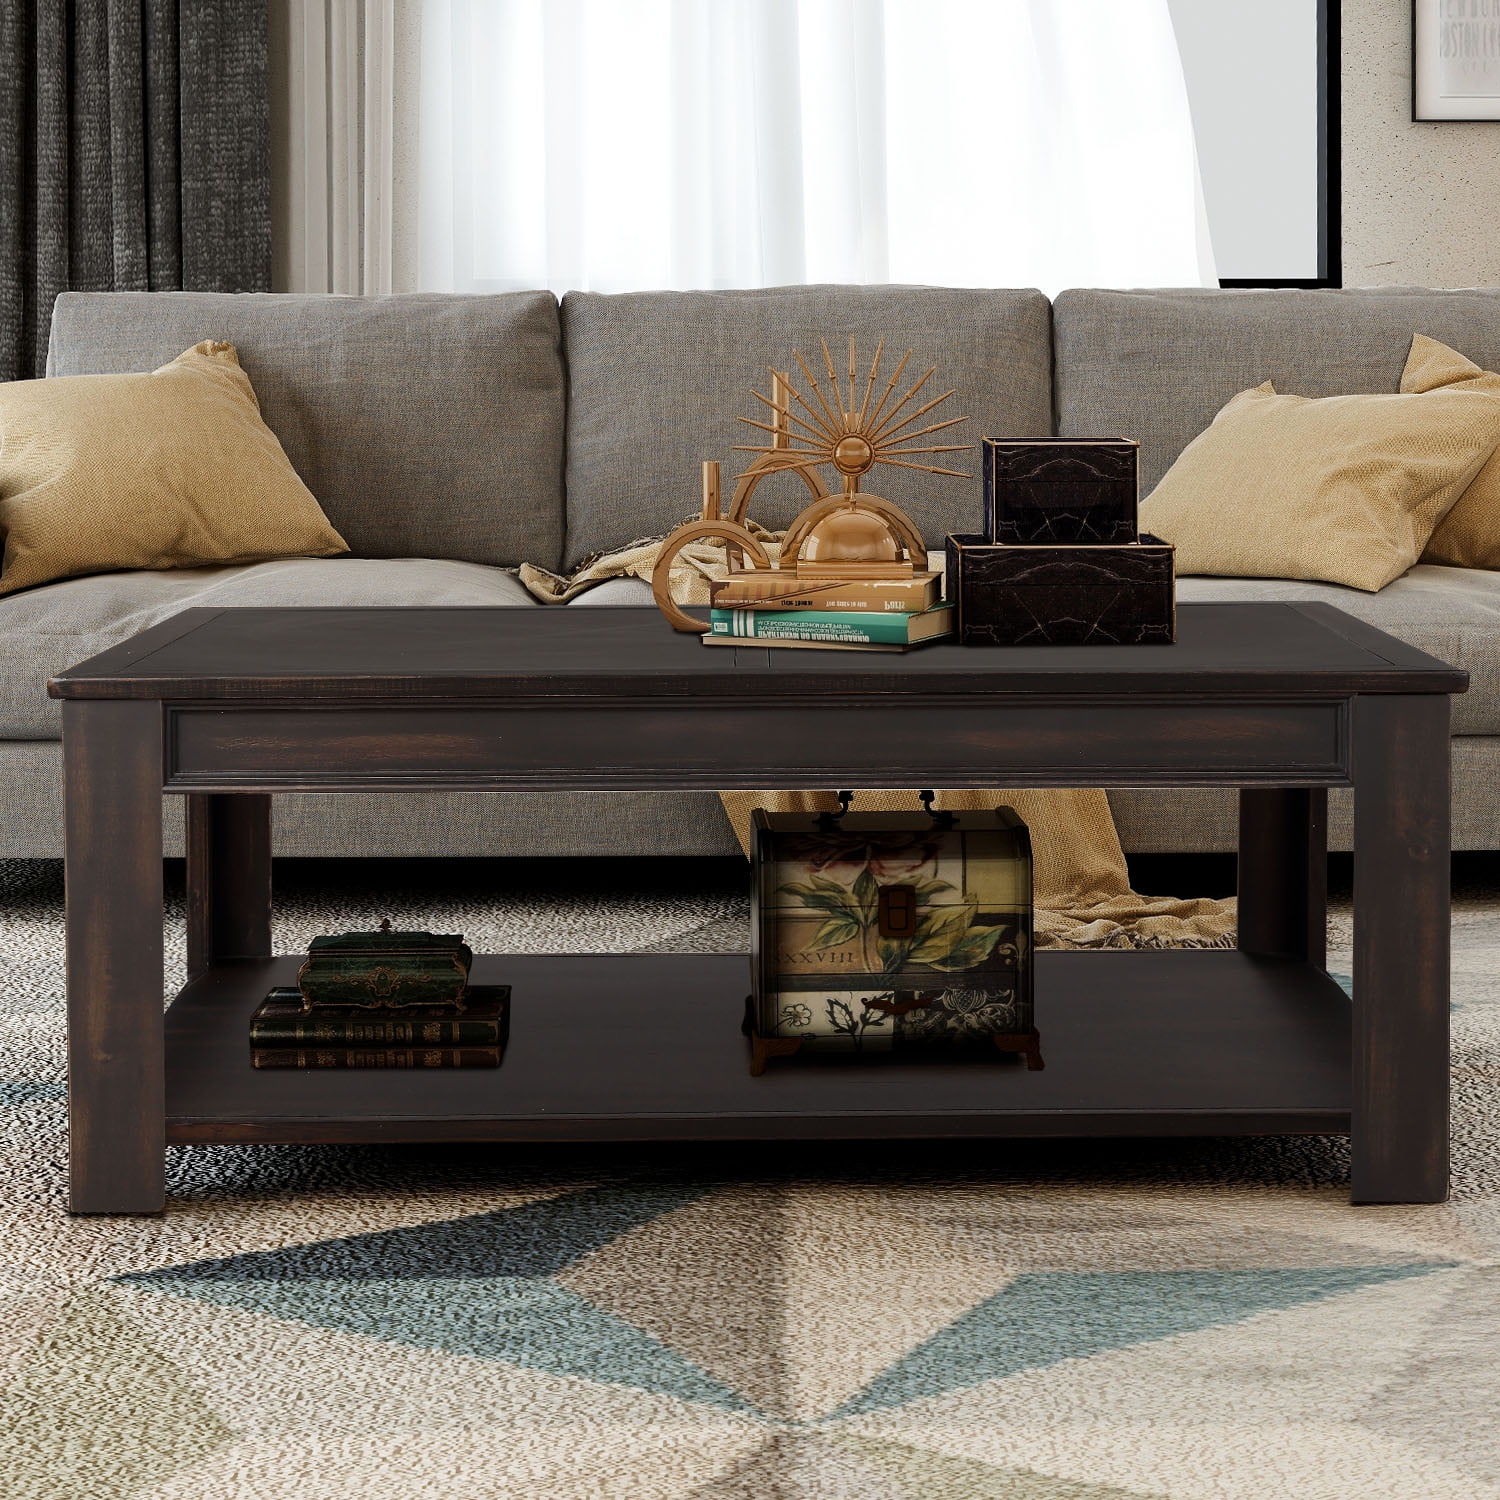 Wooden Wood Top Coffee Table for Living Room, SEGMART 48'' x 26''x 18